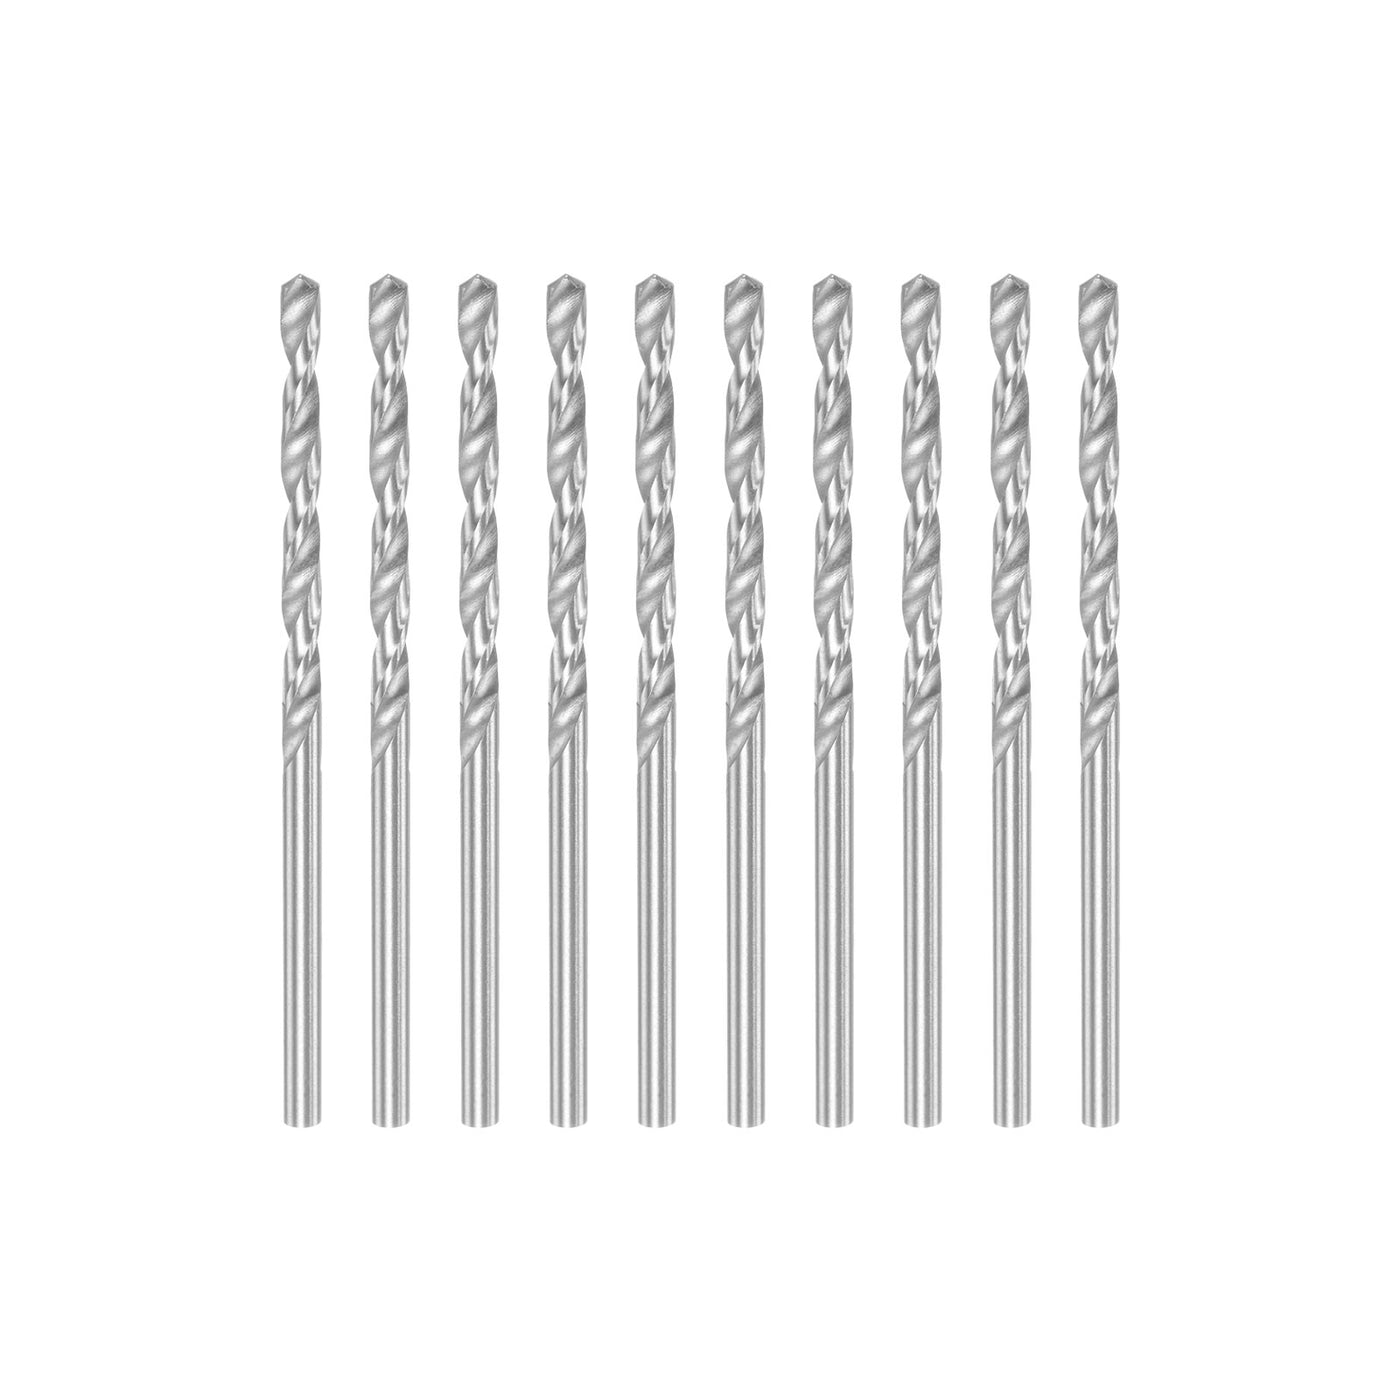 uxcell Uxcell 10 Pcs 2.55mm High Speed Steel Drill Bits, Fully Ground 56mm Length Drill Bit